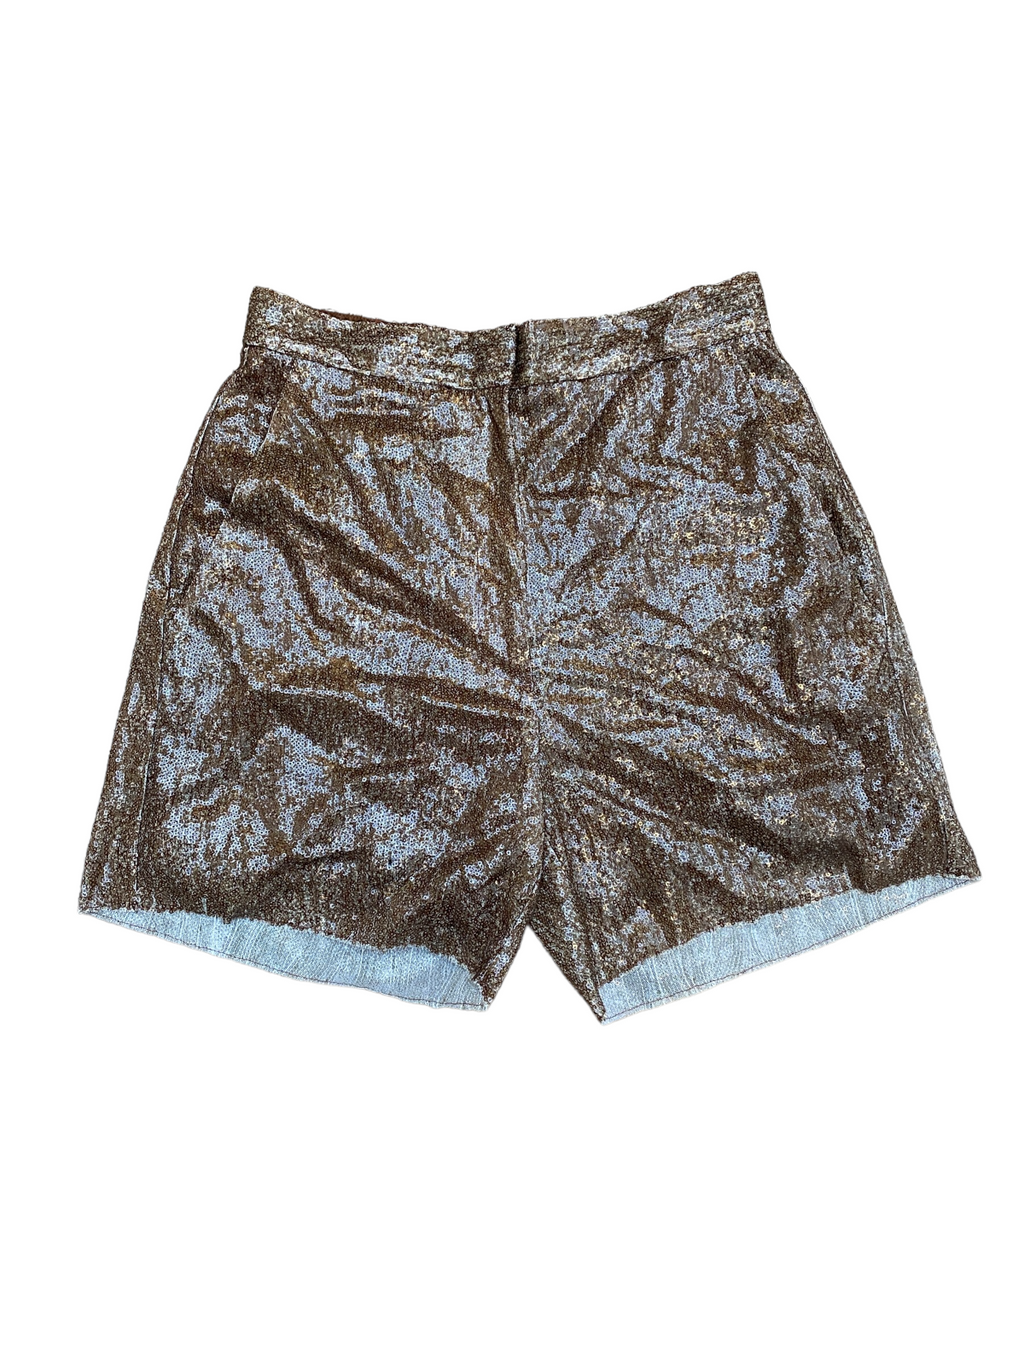 Sequined brown tobacco shorts